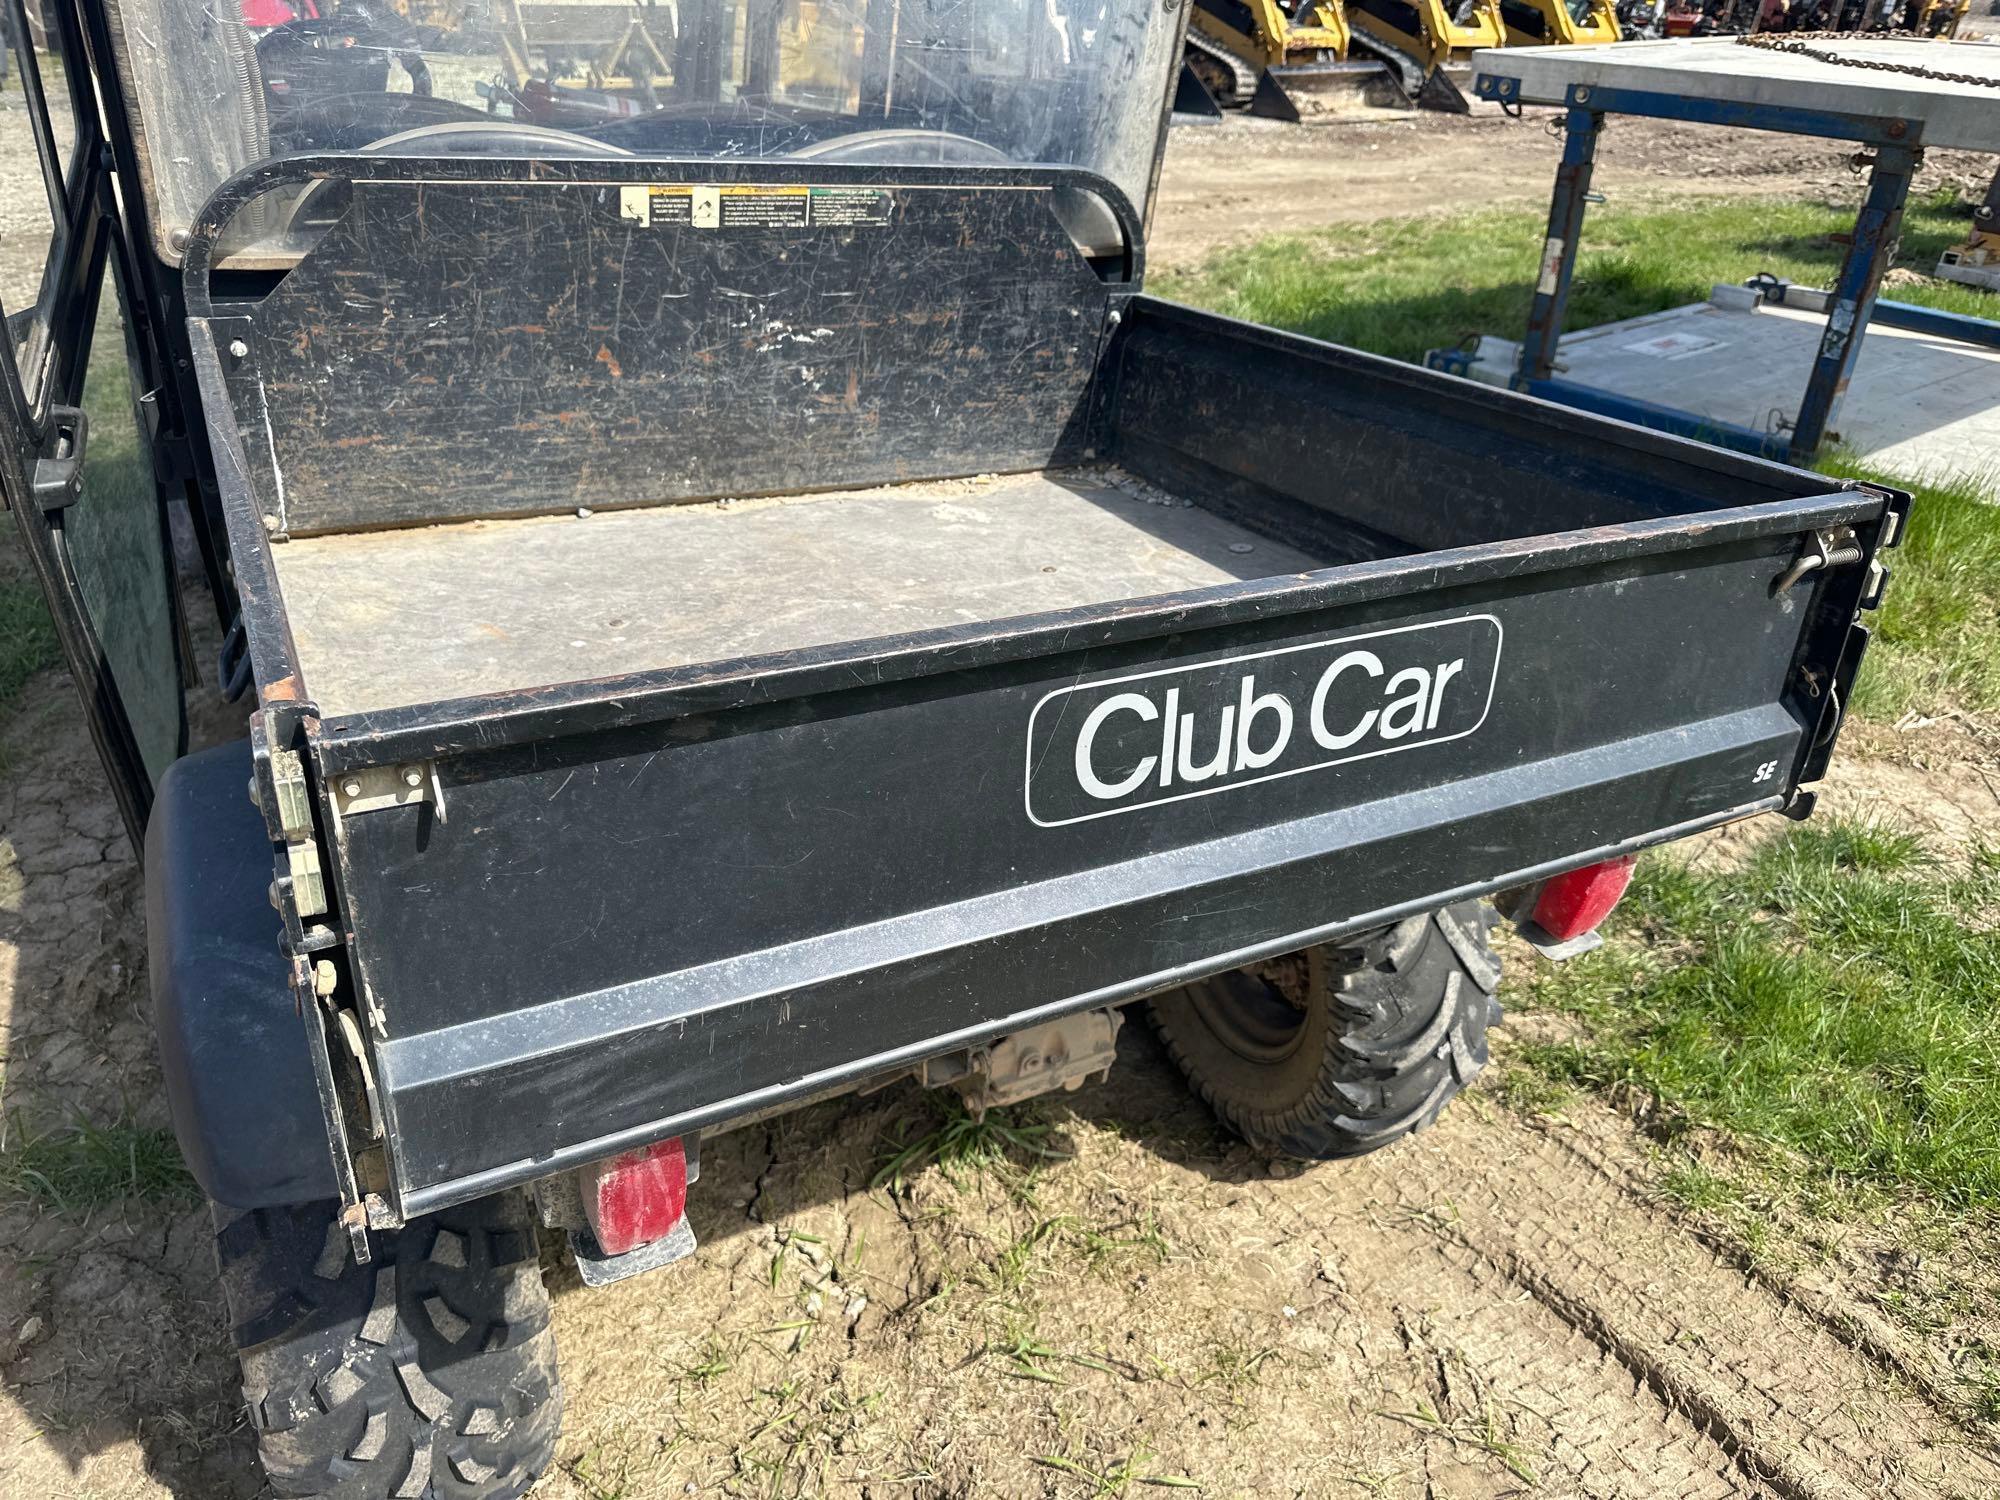 2017 CLUB CAR CARRYALL 1700 UTILITY VEHICLE 4x4, powered by diesel engine, equipped with EROPS,